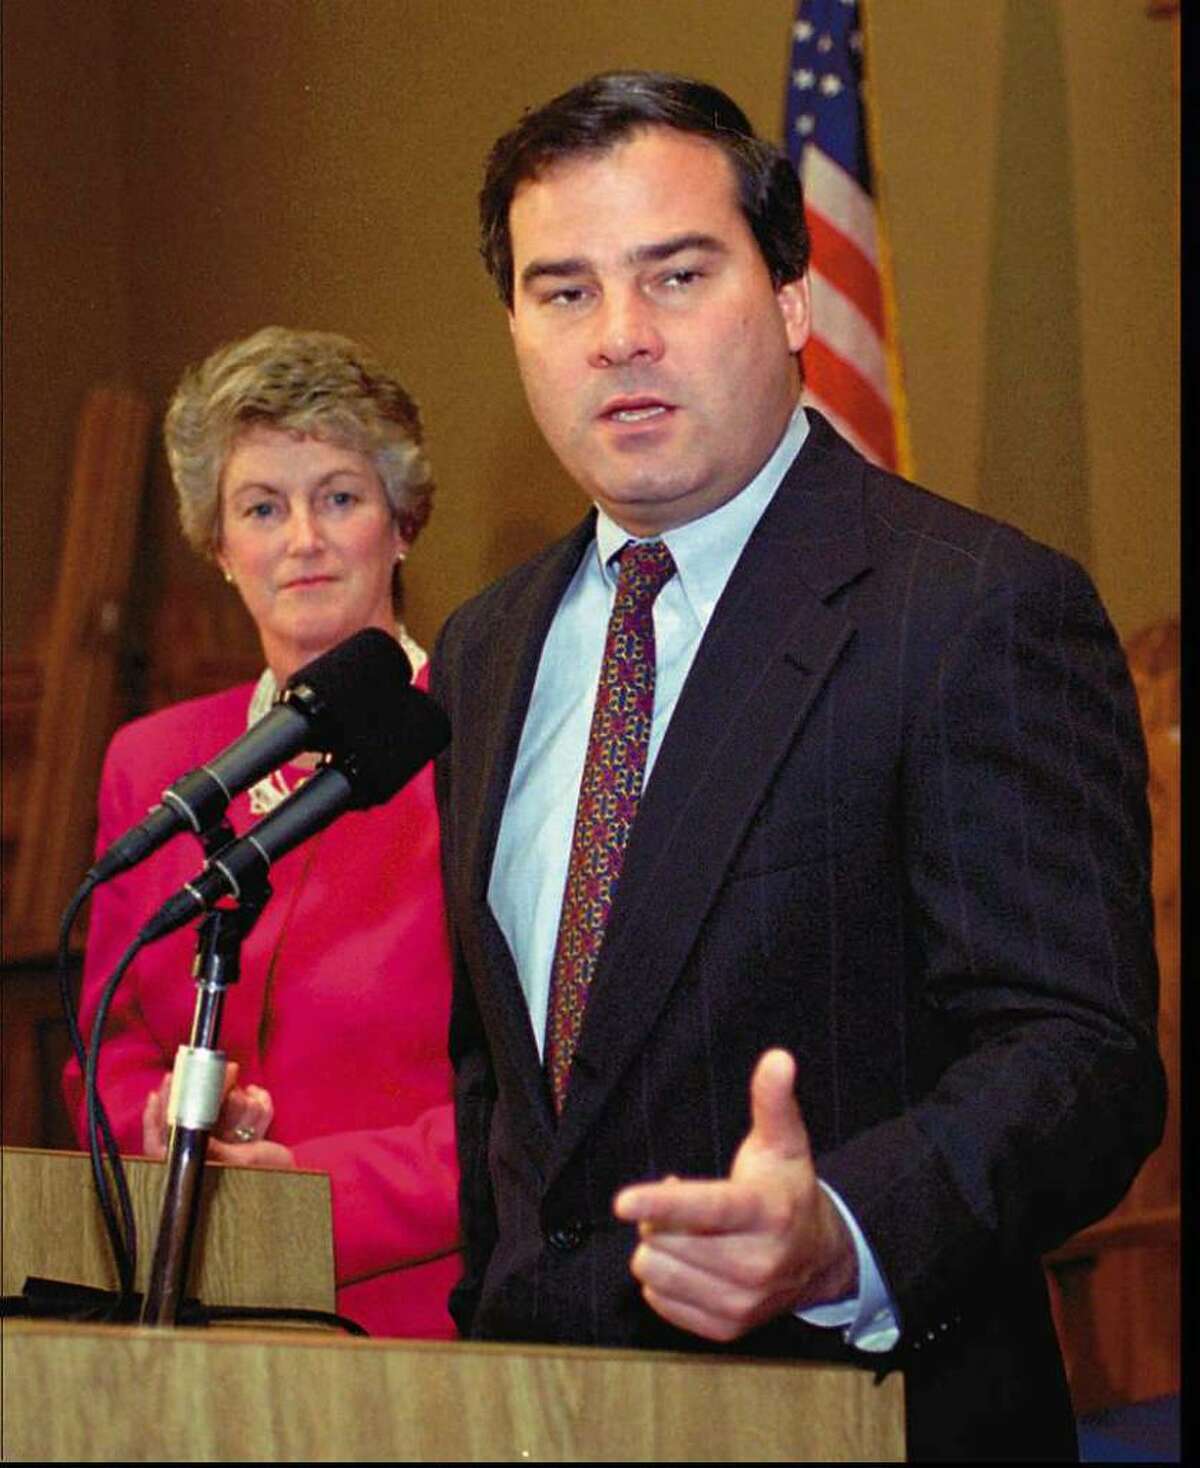 Then Governor-elect John G. Rowland speaks at a news conference at the state capitol in Hartford Wednesday, Nov. 9, 1994, the first day after he won the election. Rowland was 37 at the time. At left is then Lt. Gov.-elect state Rep. Jodi Rell, R-Brookfield. (AP Photo/Bob Child)